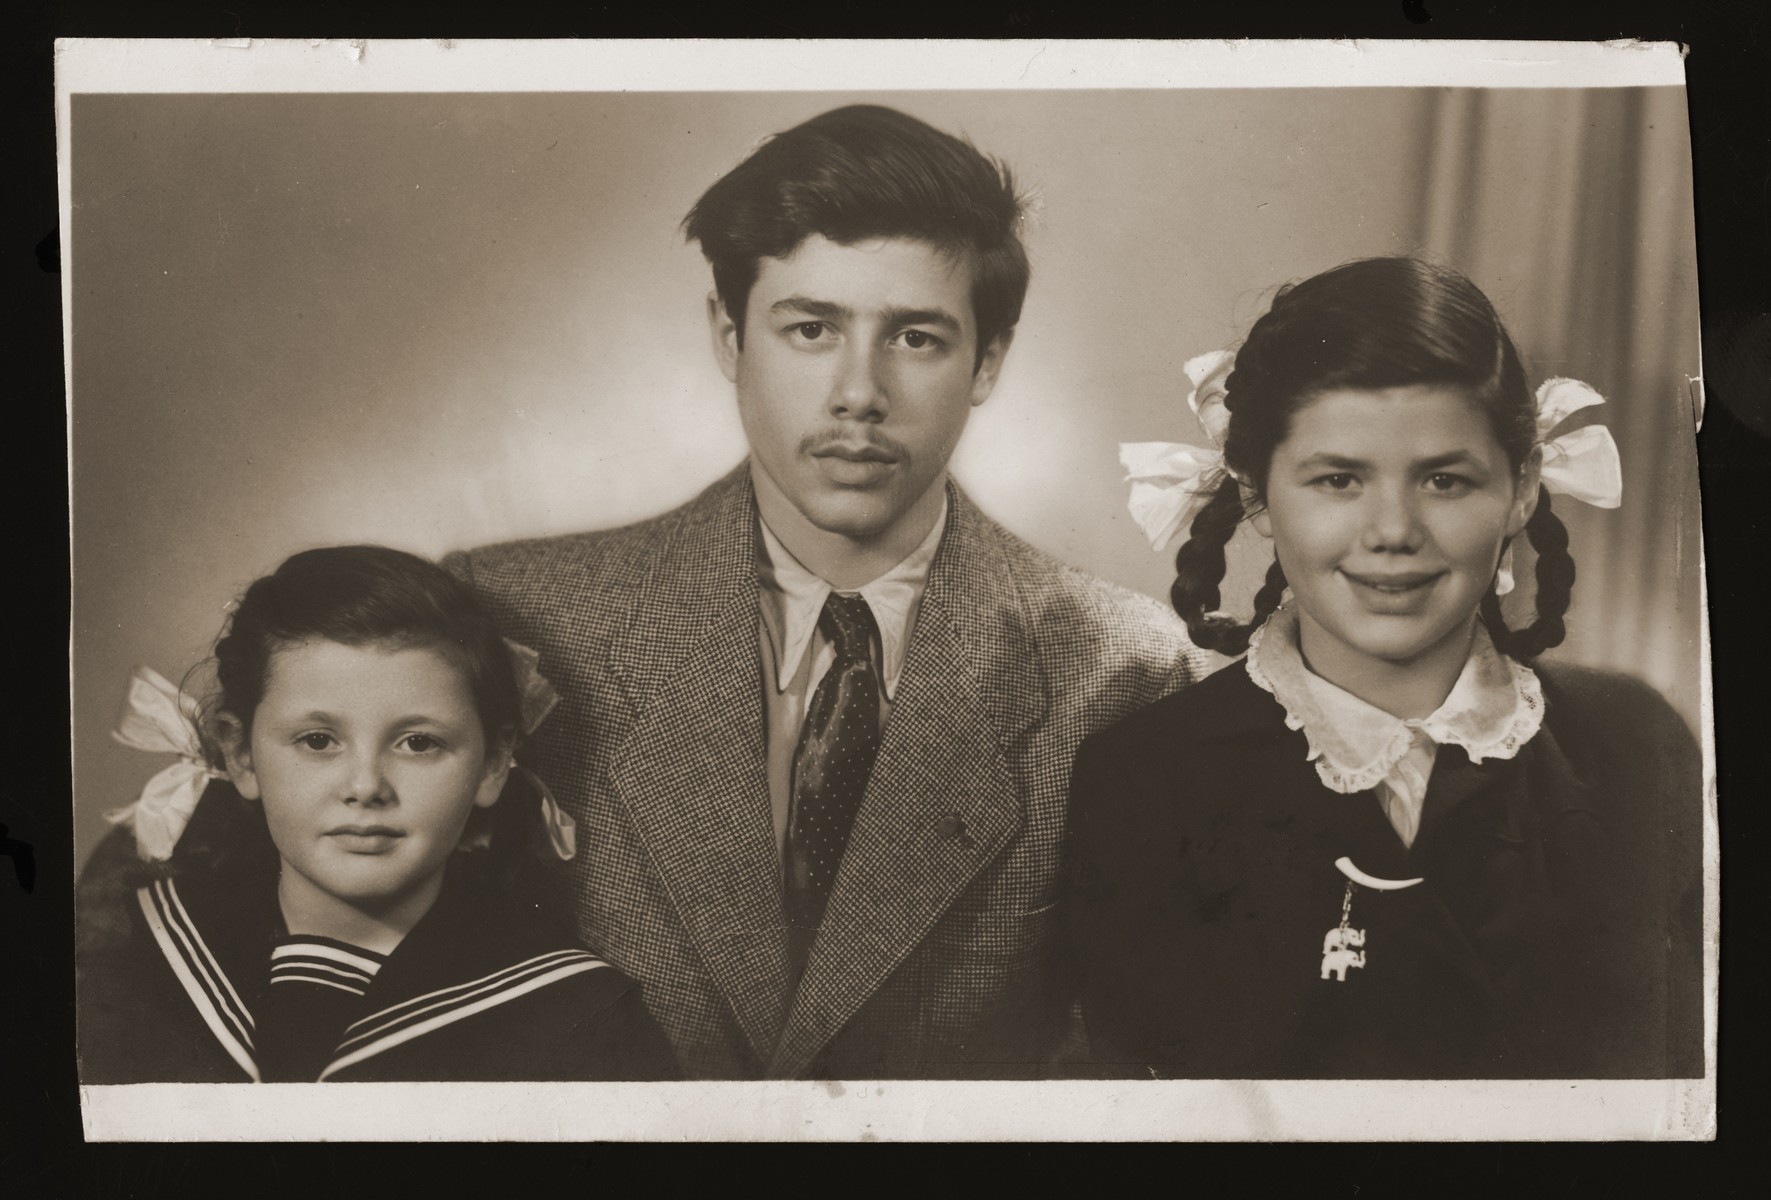 Studio portrait of three Belgian Jewish siblings who survived the war in France.  

Pictured from left to right are: Josephina, Andre, and Lucie Zalc.